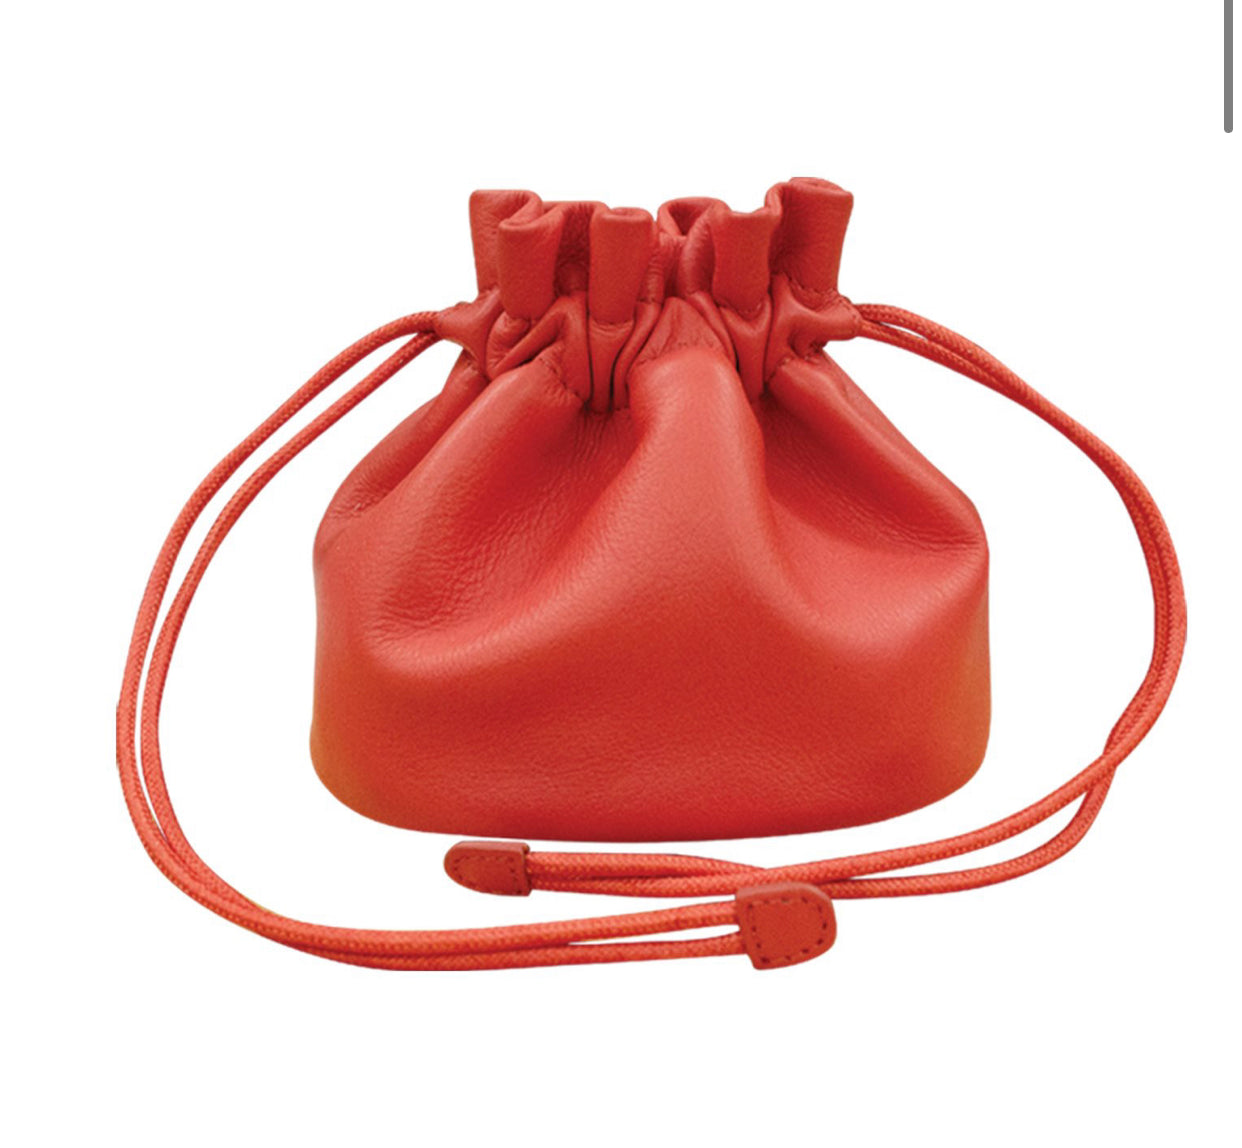 Shop WADORN 2pcs Leather Bag Drawstring Replacement for Jewelry